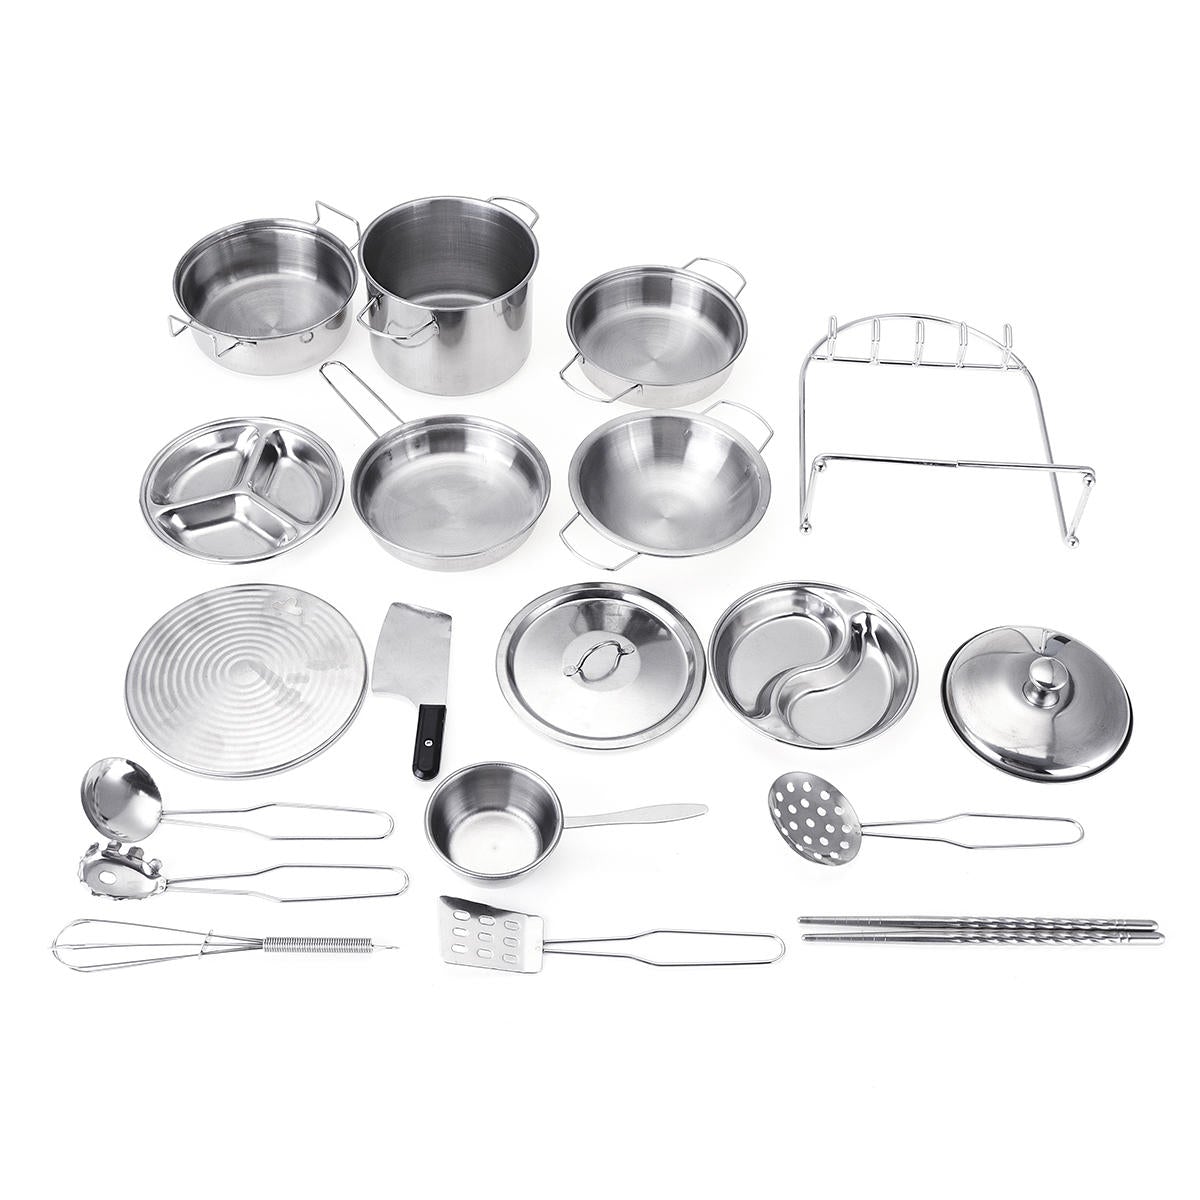 32PCS Mini Stainless Steel Kitchen Cutlery Play House Food Toy Boiler Kettle Cup Bowl Spoon Cookware